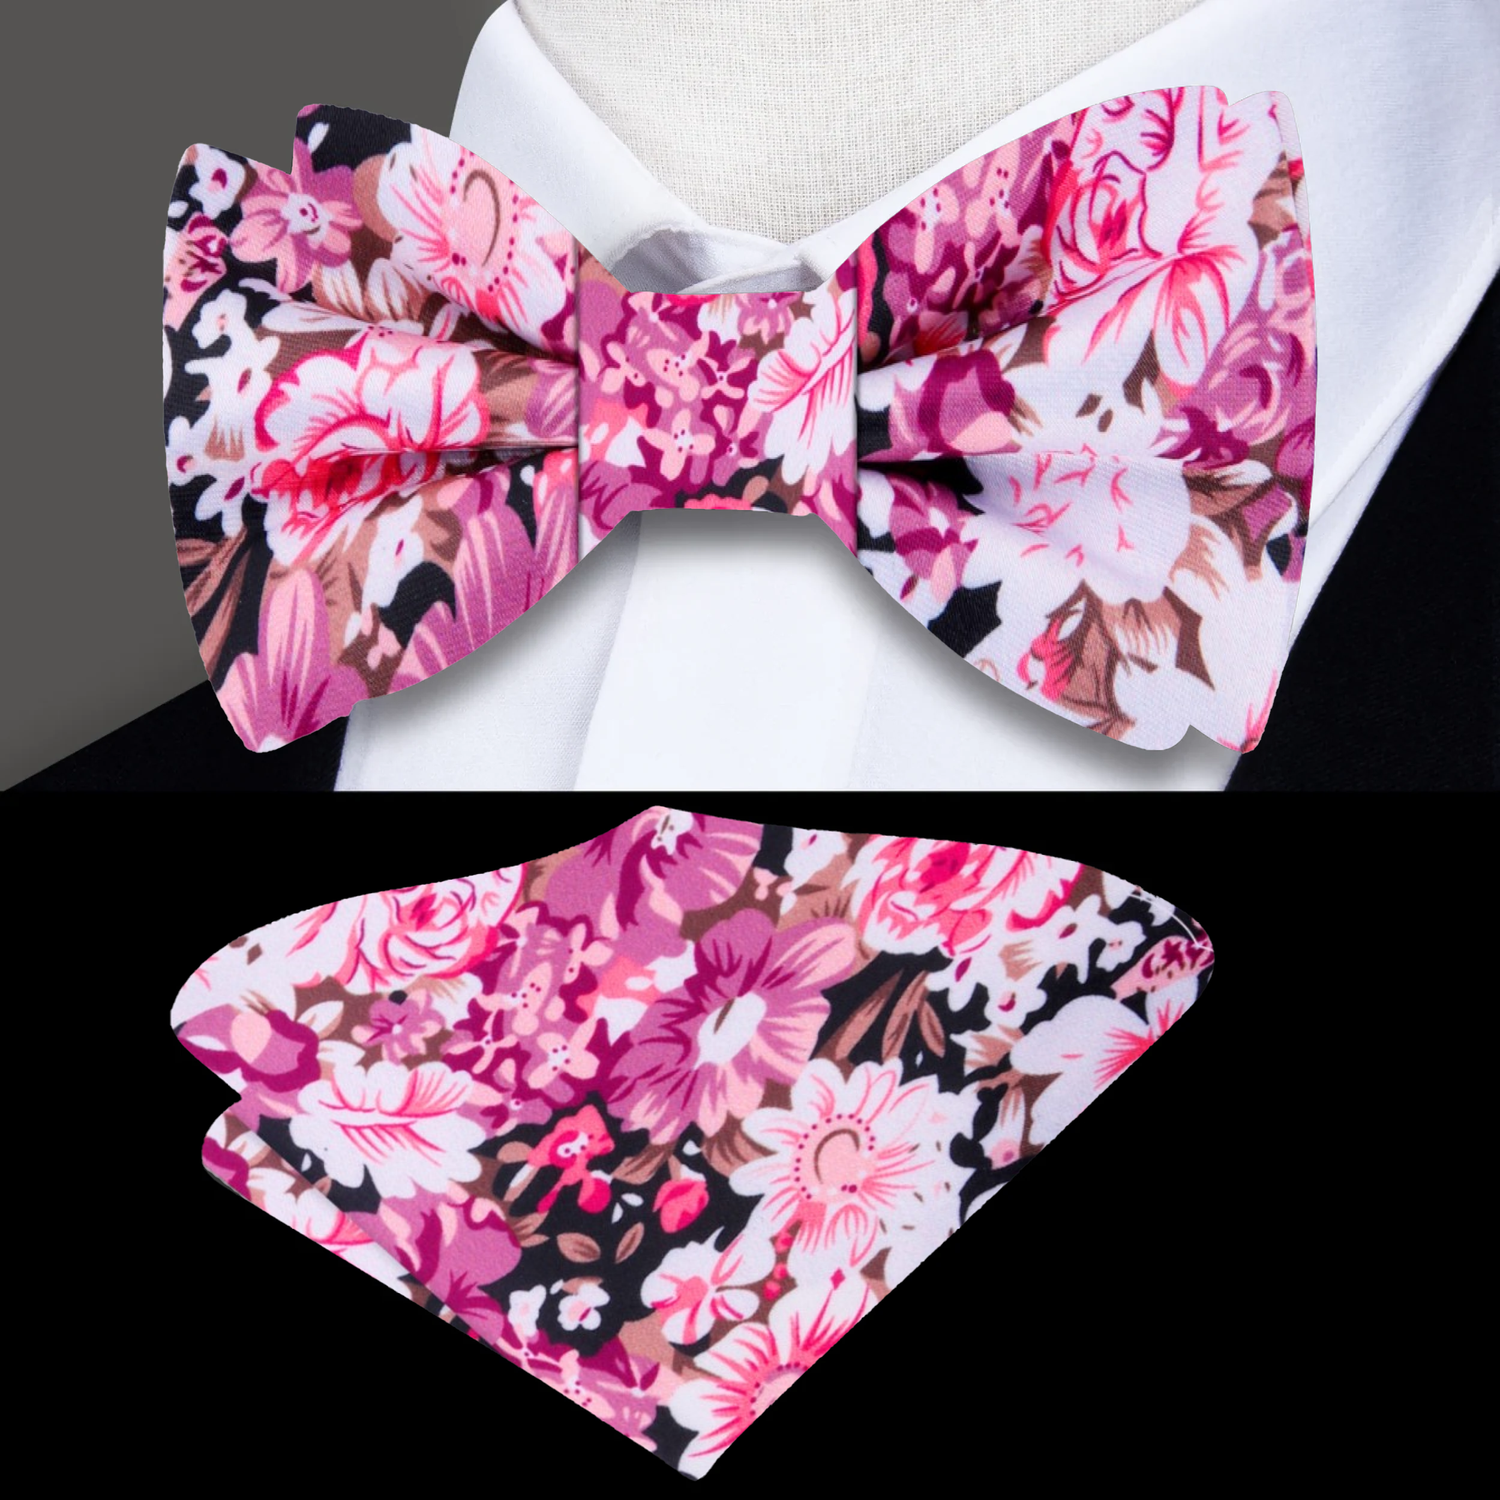 Shades of Purple and Pink with White Flowers Bow Tie and Matching Pocket Square